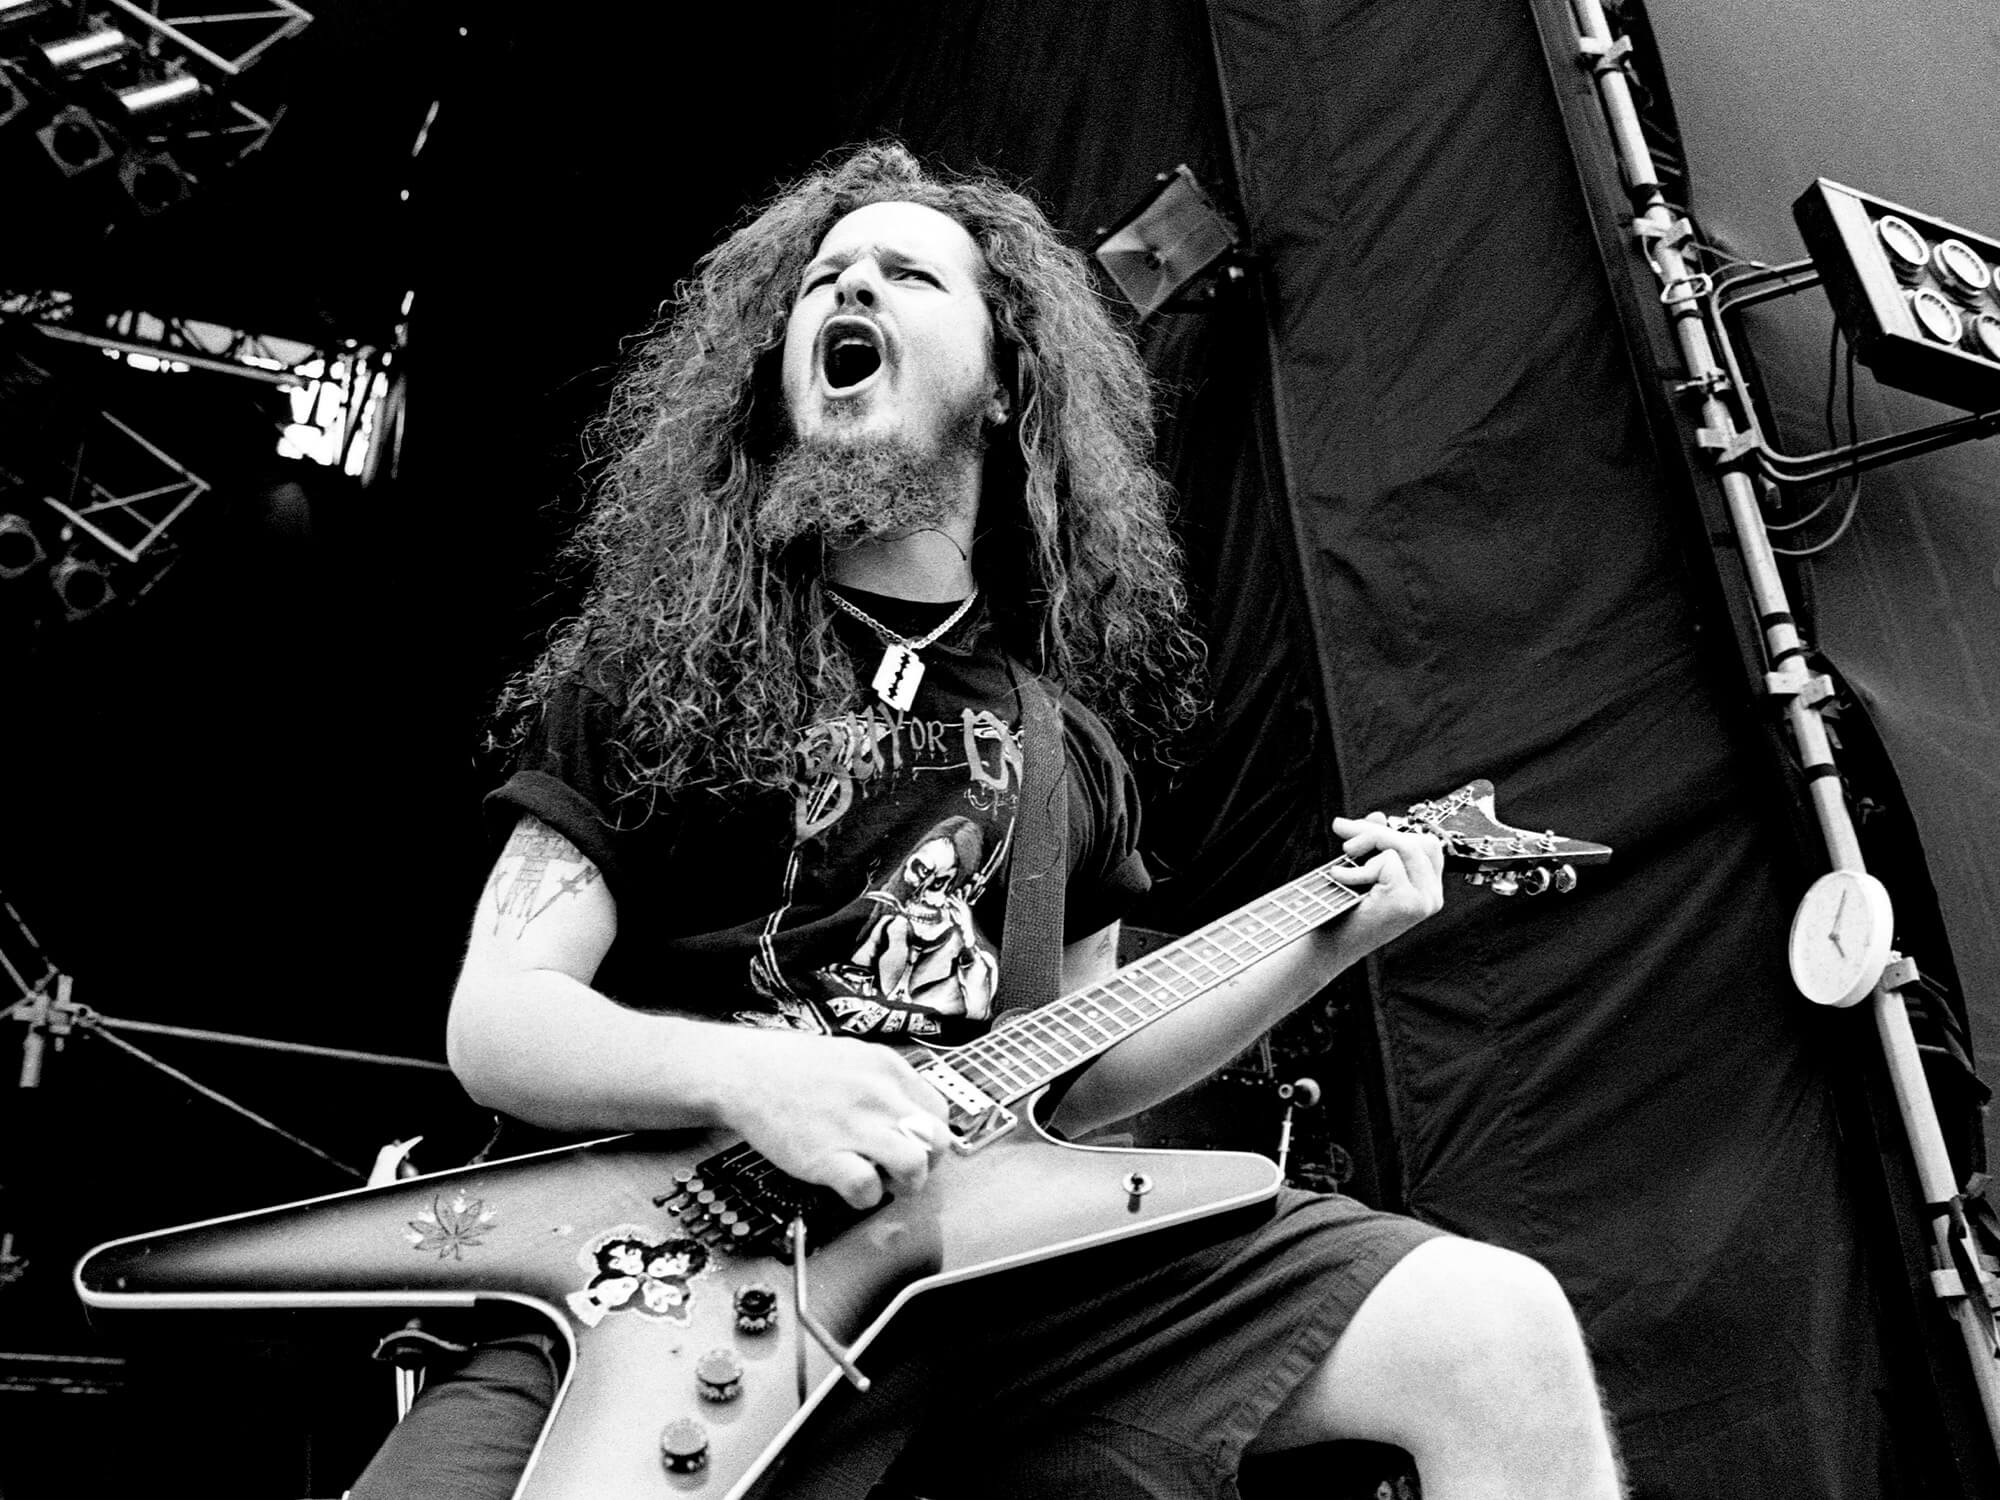 Dimebag Darrell of Pantera on stage in 1994. Photo is black and white, and shows him playing guitar and calling out into the crowd.